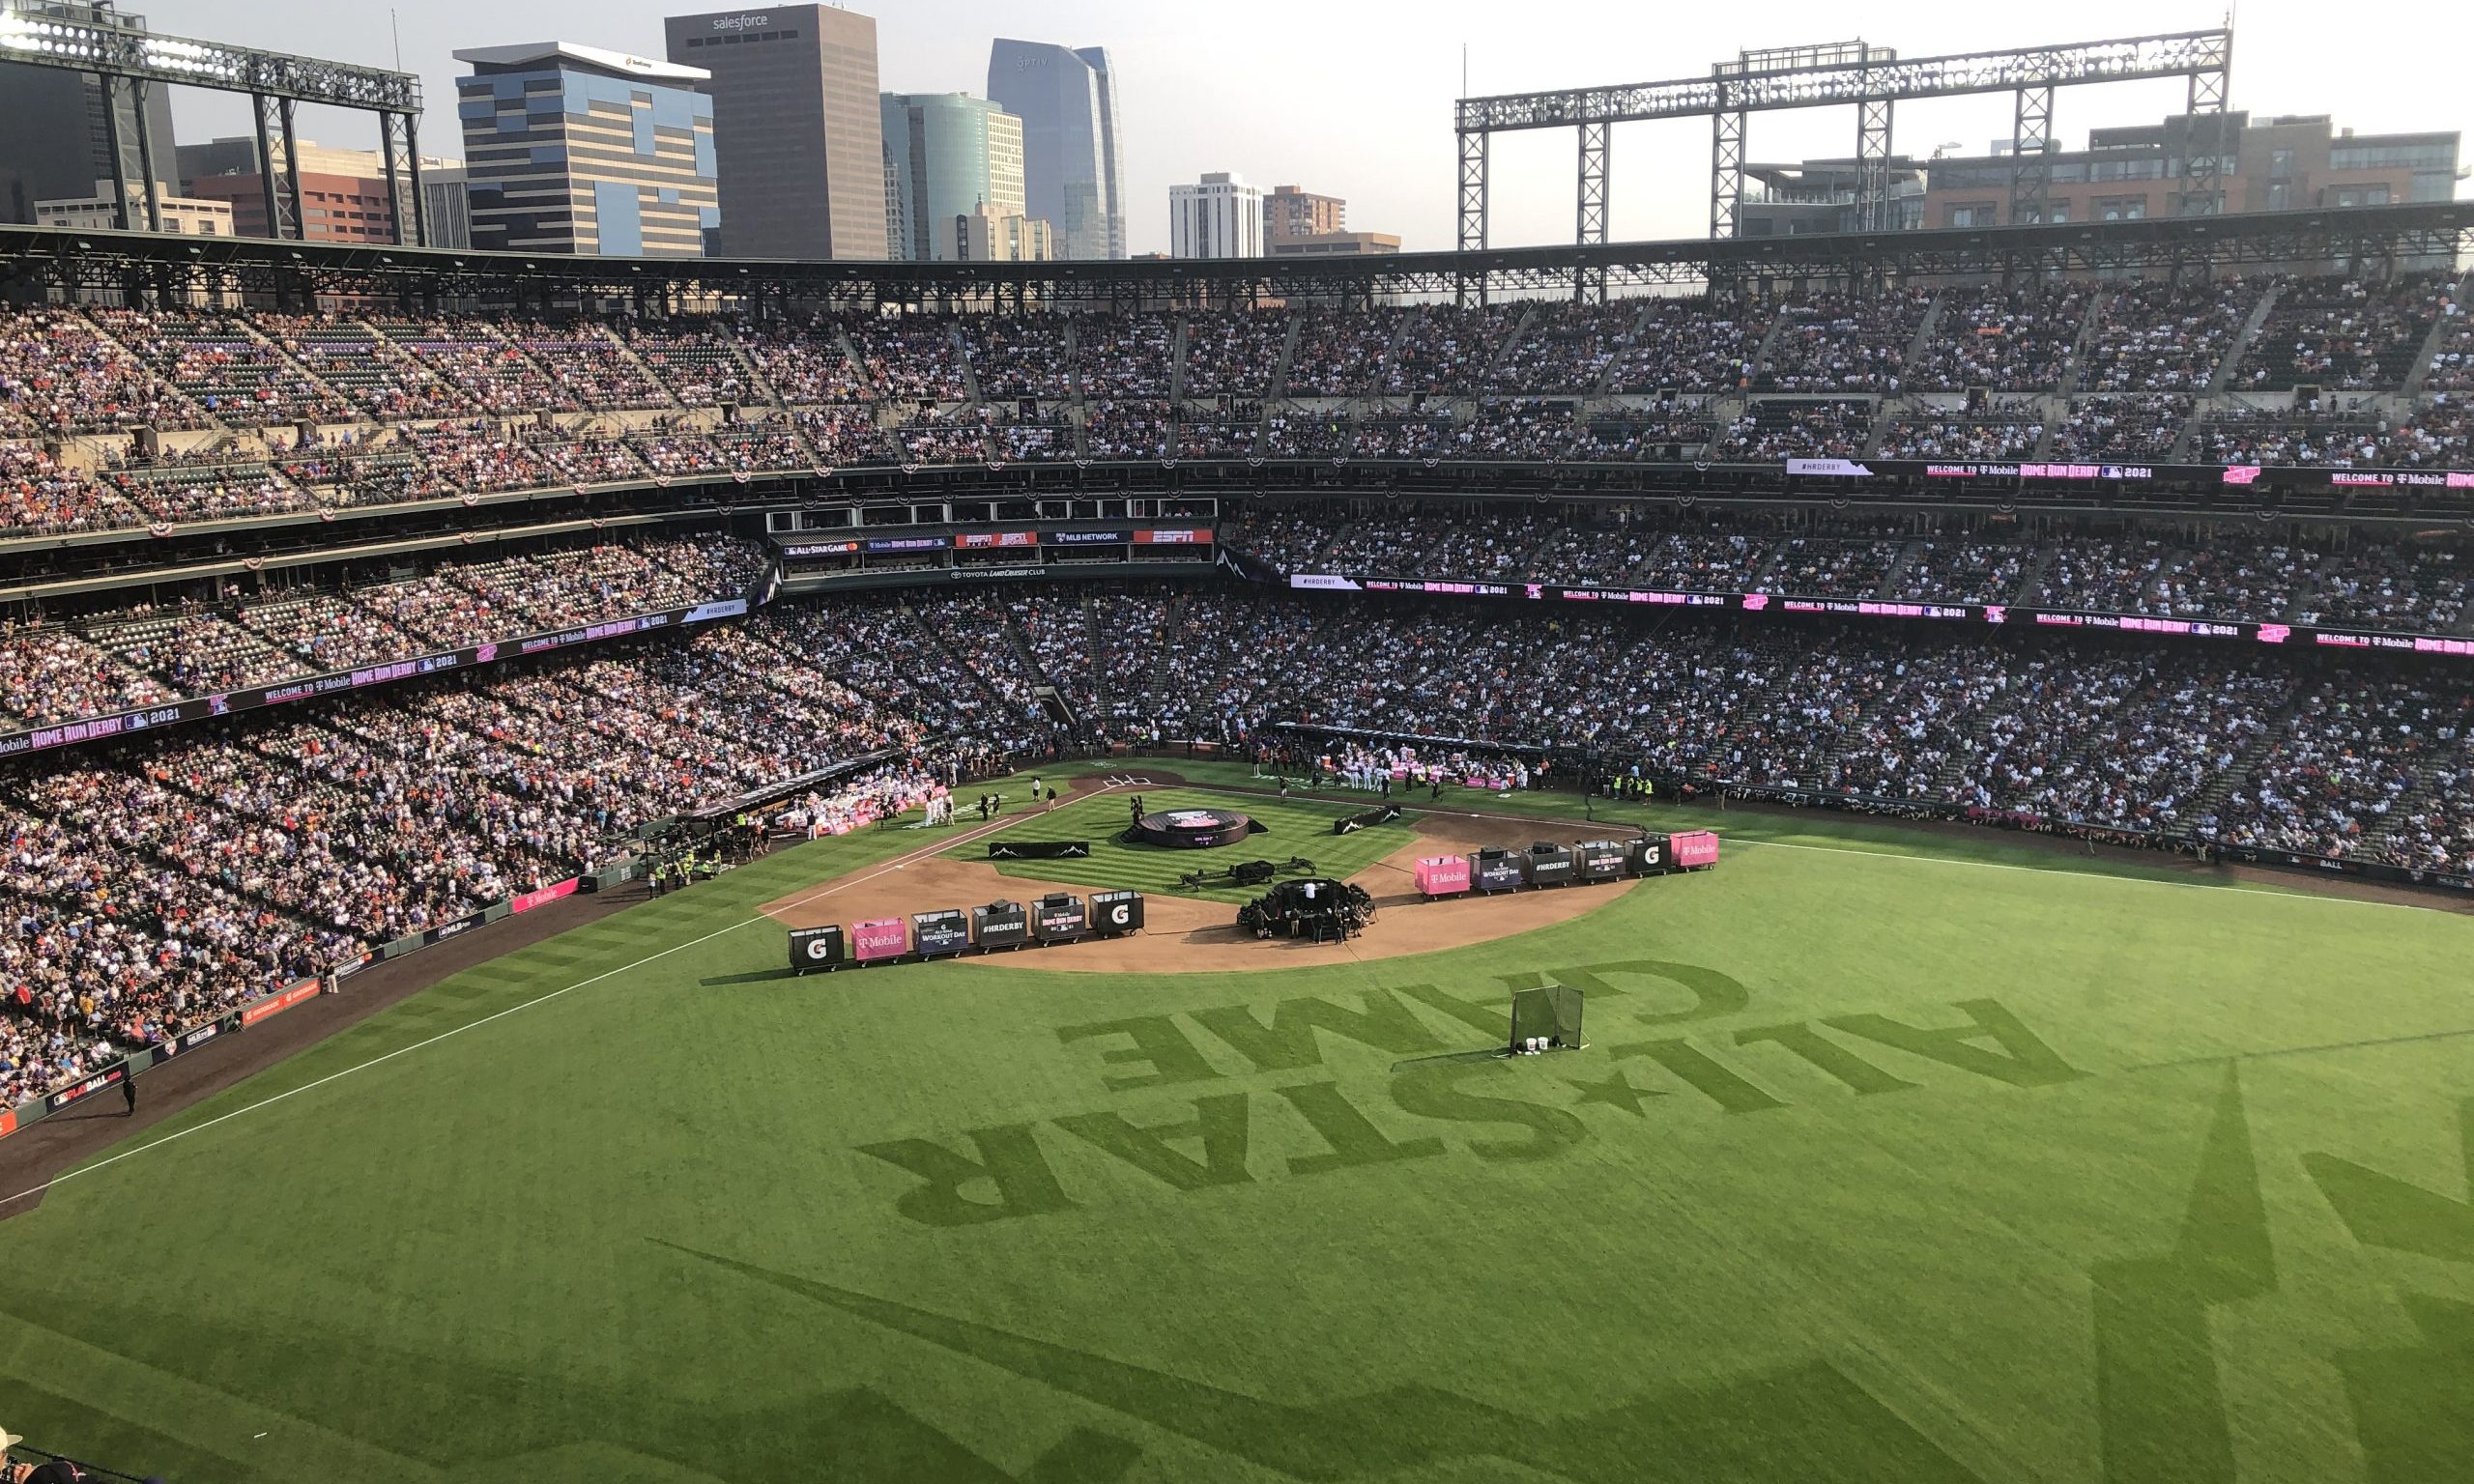 The Insider's Guide to the 2021 MLB All-Star Game in Denver - 5280